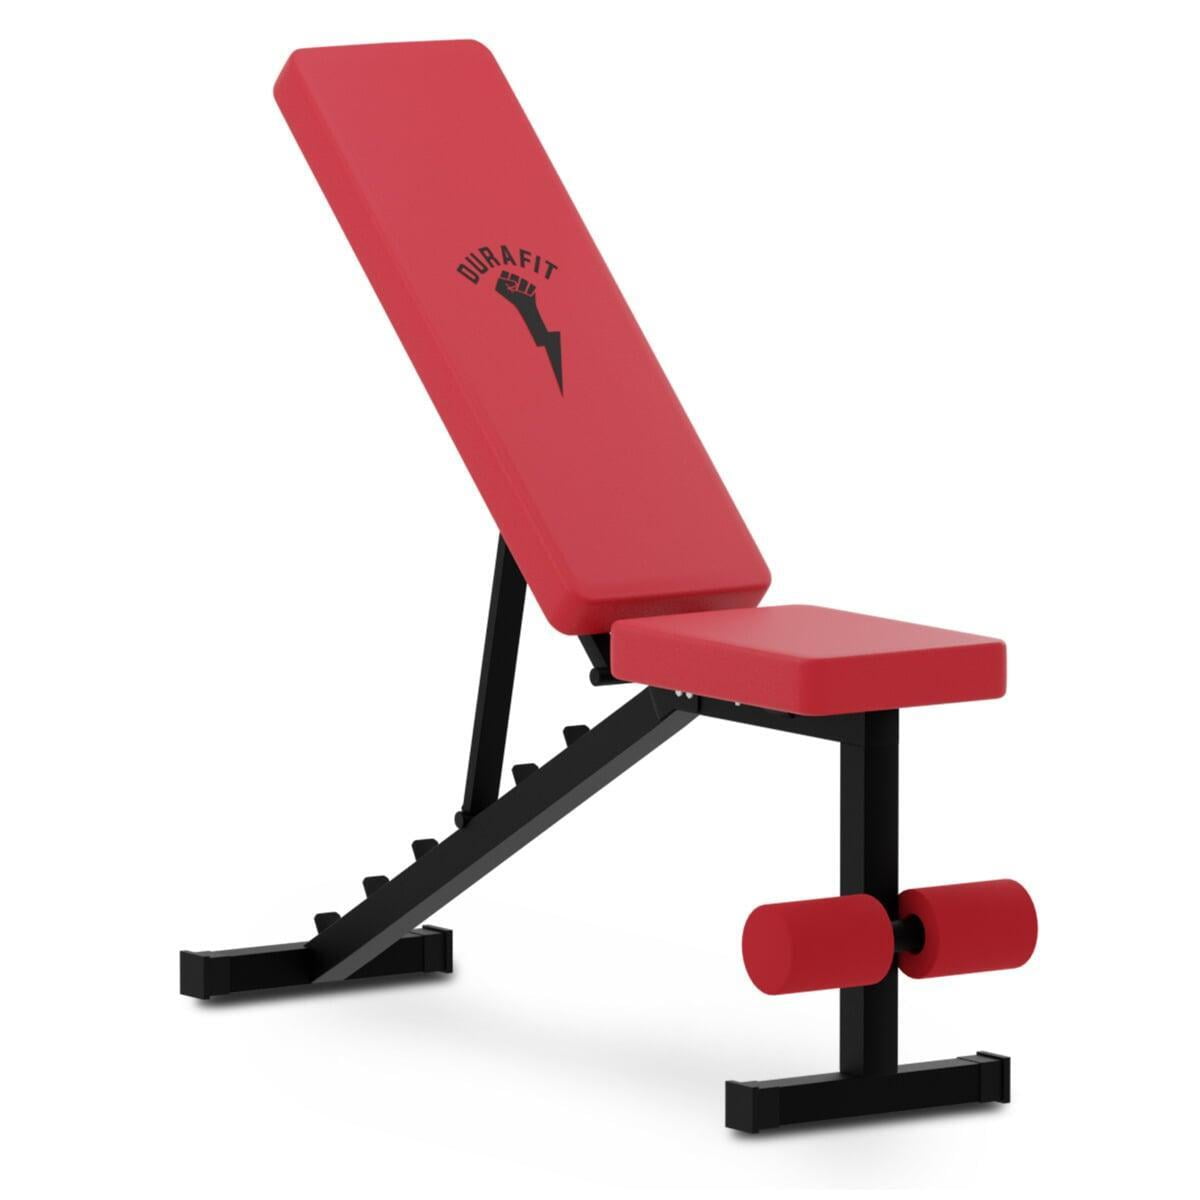 Durafit Foldable bench FB01-Red